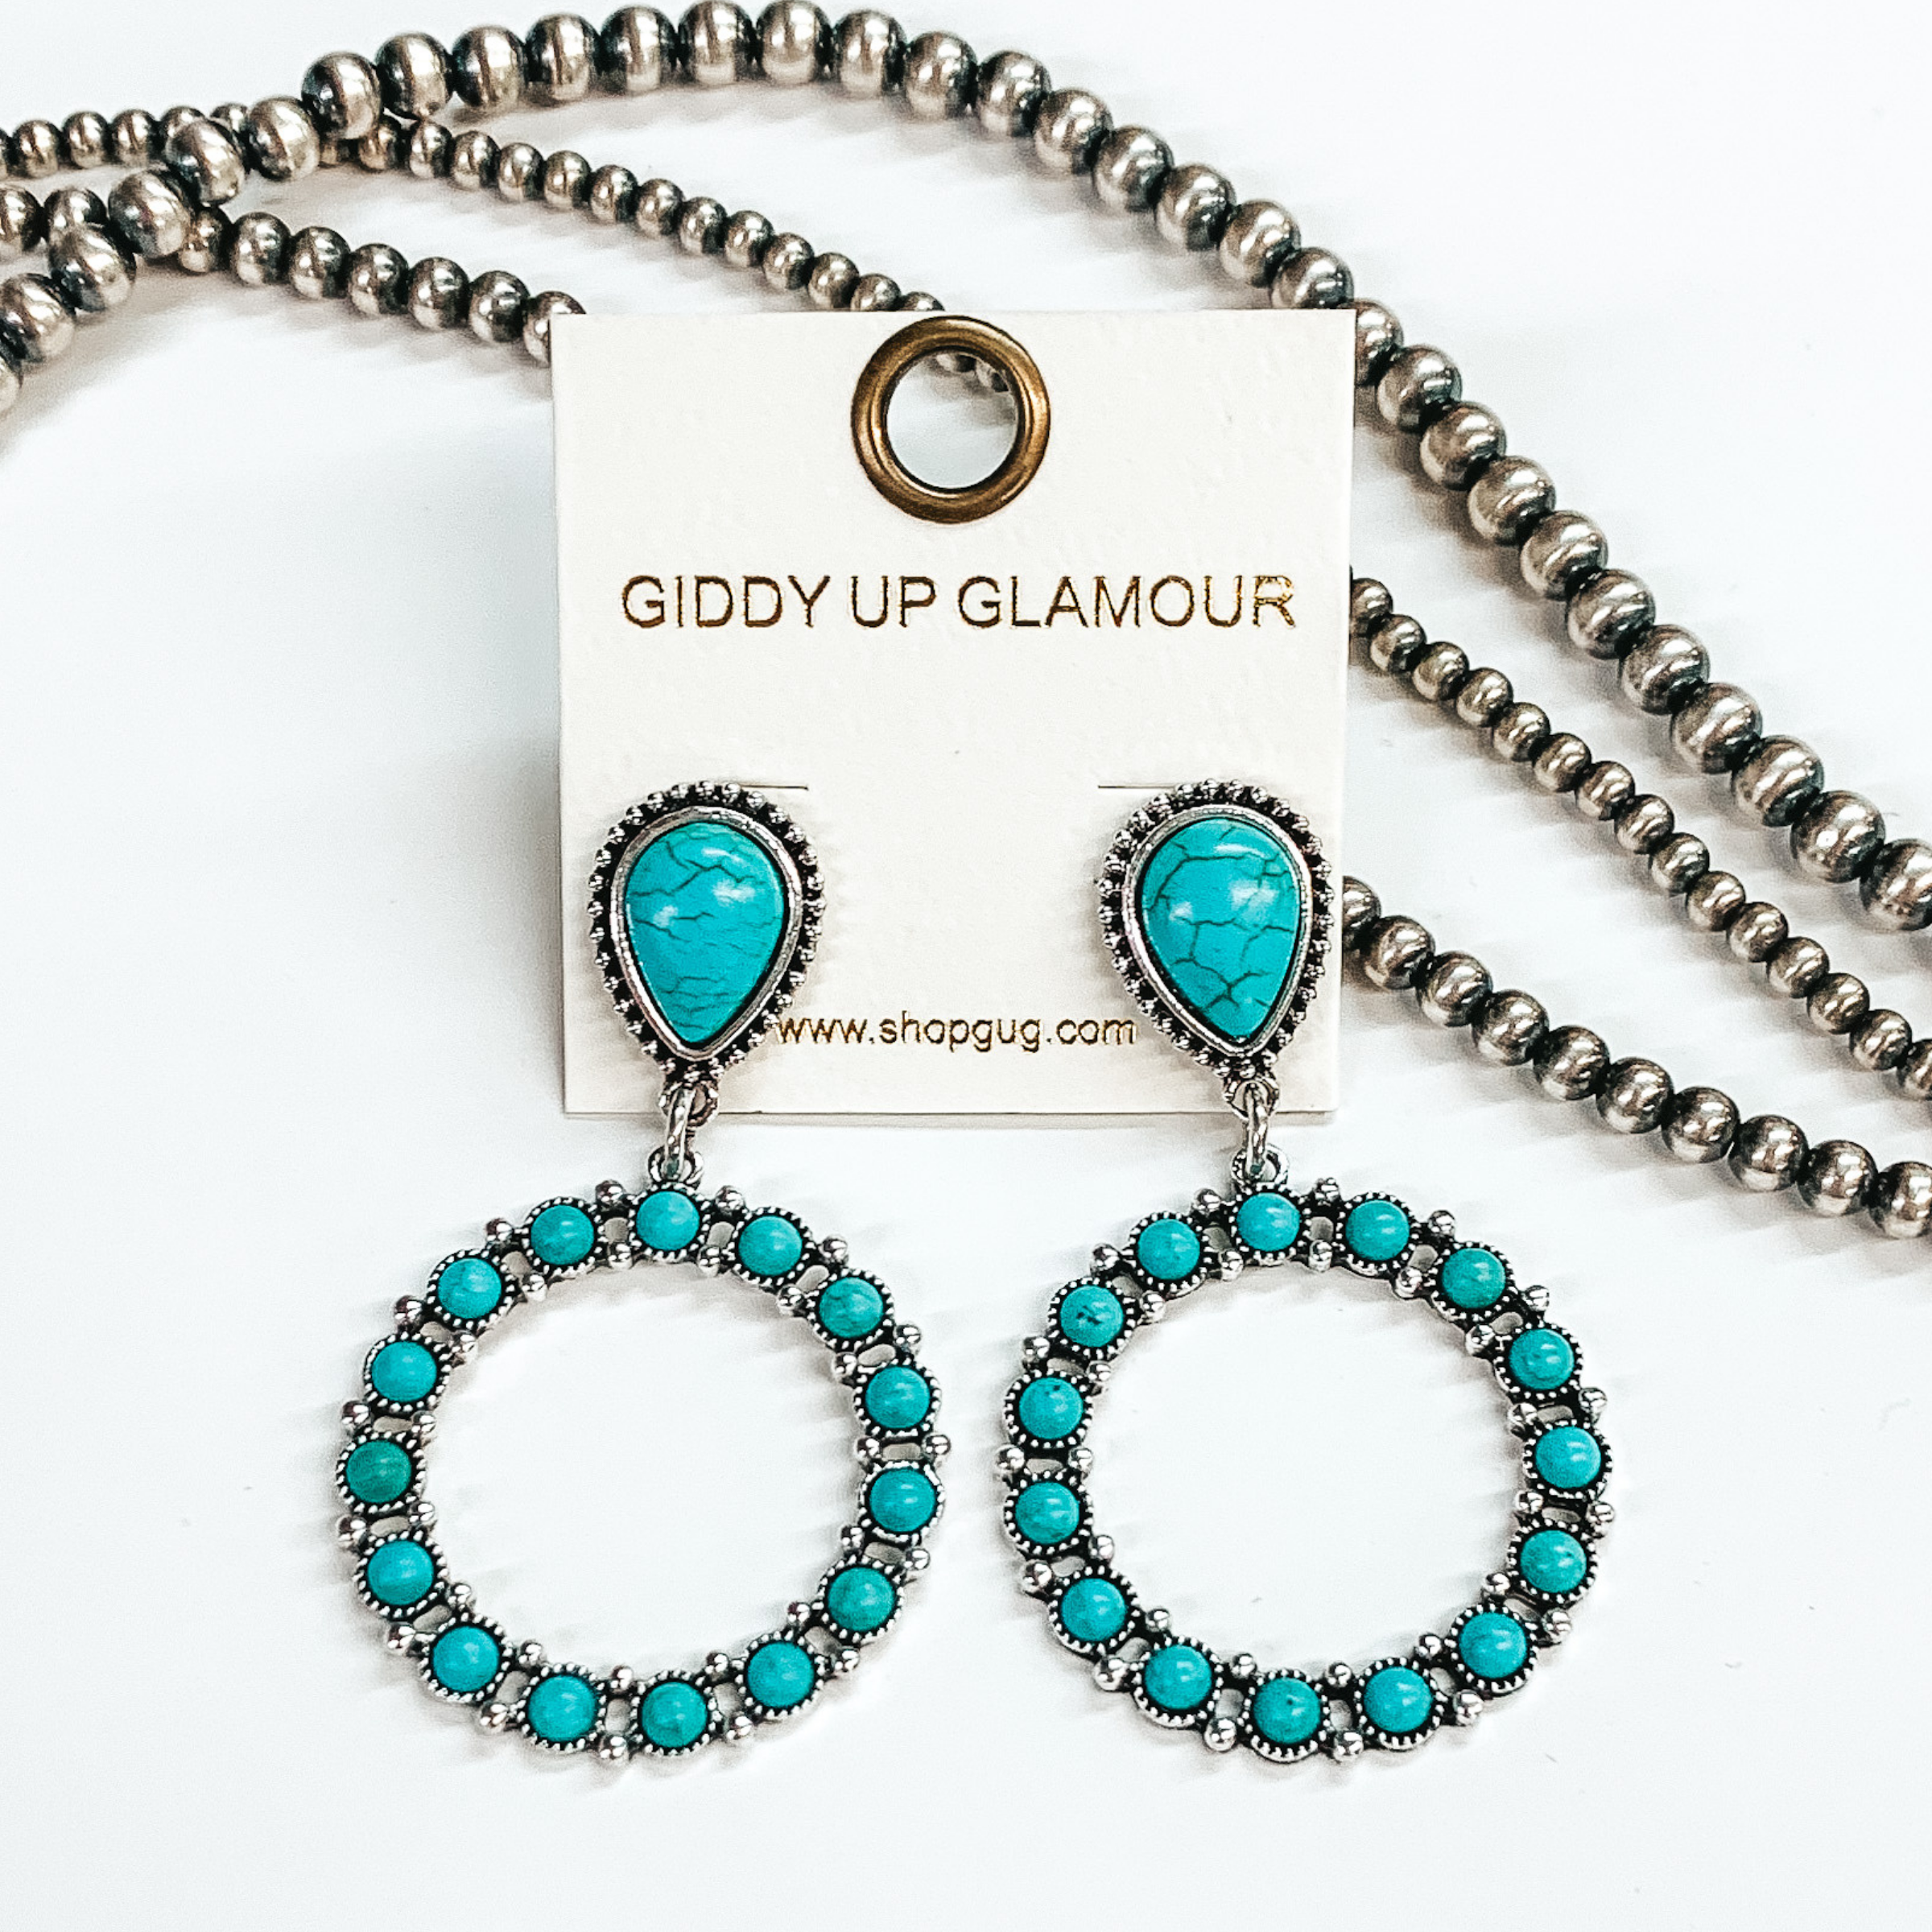 Turquoise teardrop post earrings outlined in silver and circle drop pendant with turquoise stones around. Pictured in a white background with beads as decor.